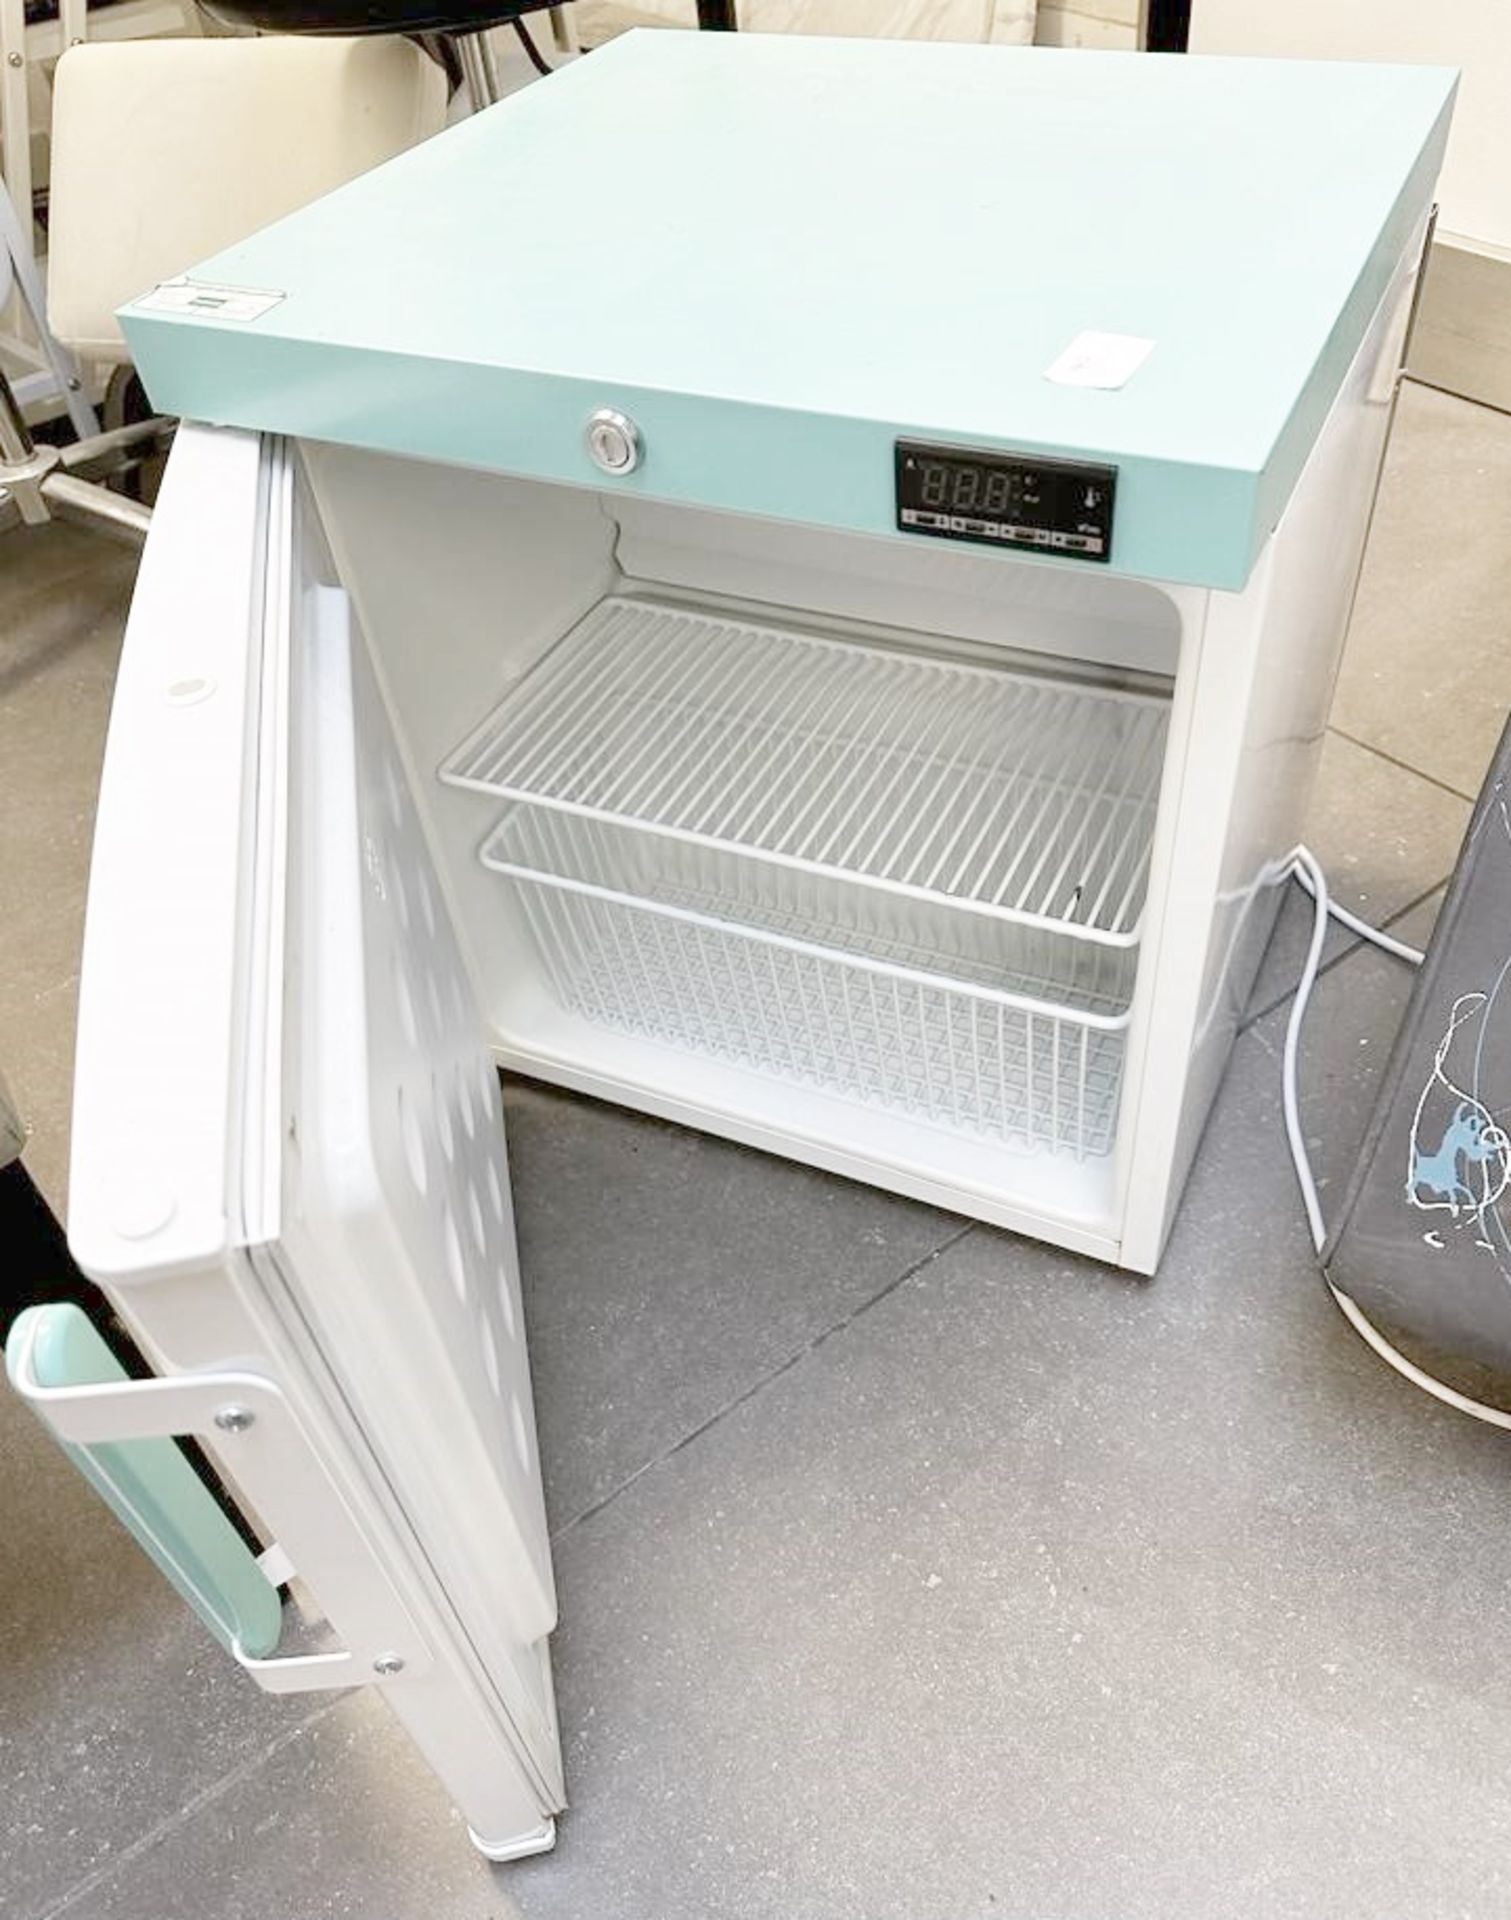 1 x LEC Under-counter Medical Fridge - From An Award-winning Chelsea Hair Salon - Ref: 000 - CL828 - Image 3 of 3